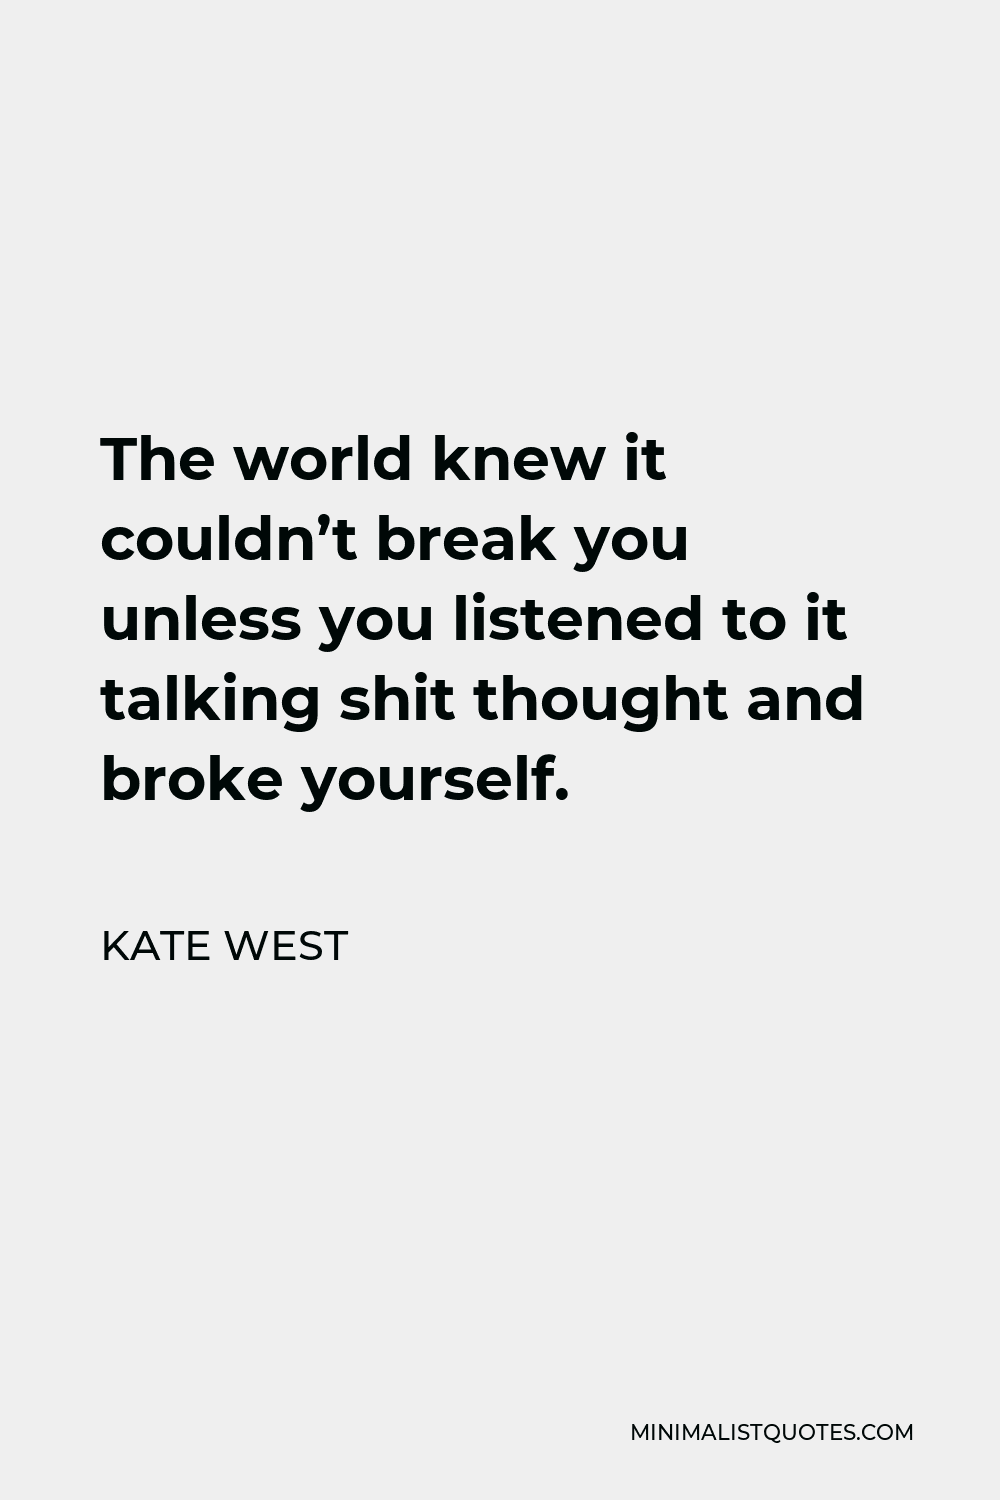 Kate West Quote - The world knew it couldn’t break you unless you listened to it talking shit thought and broke yourself.